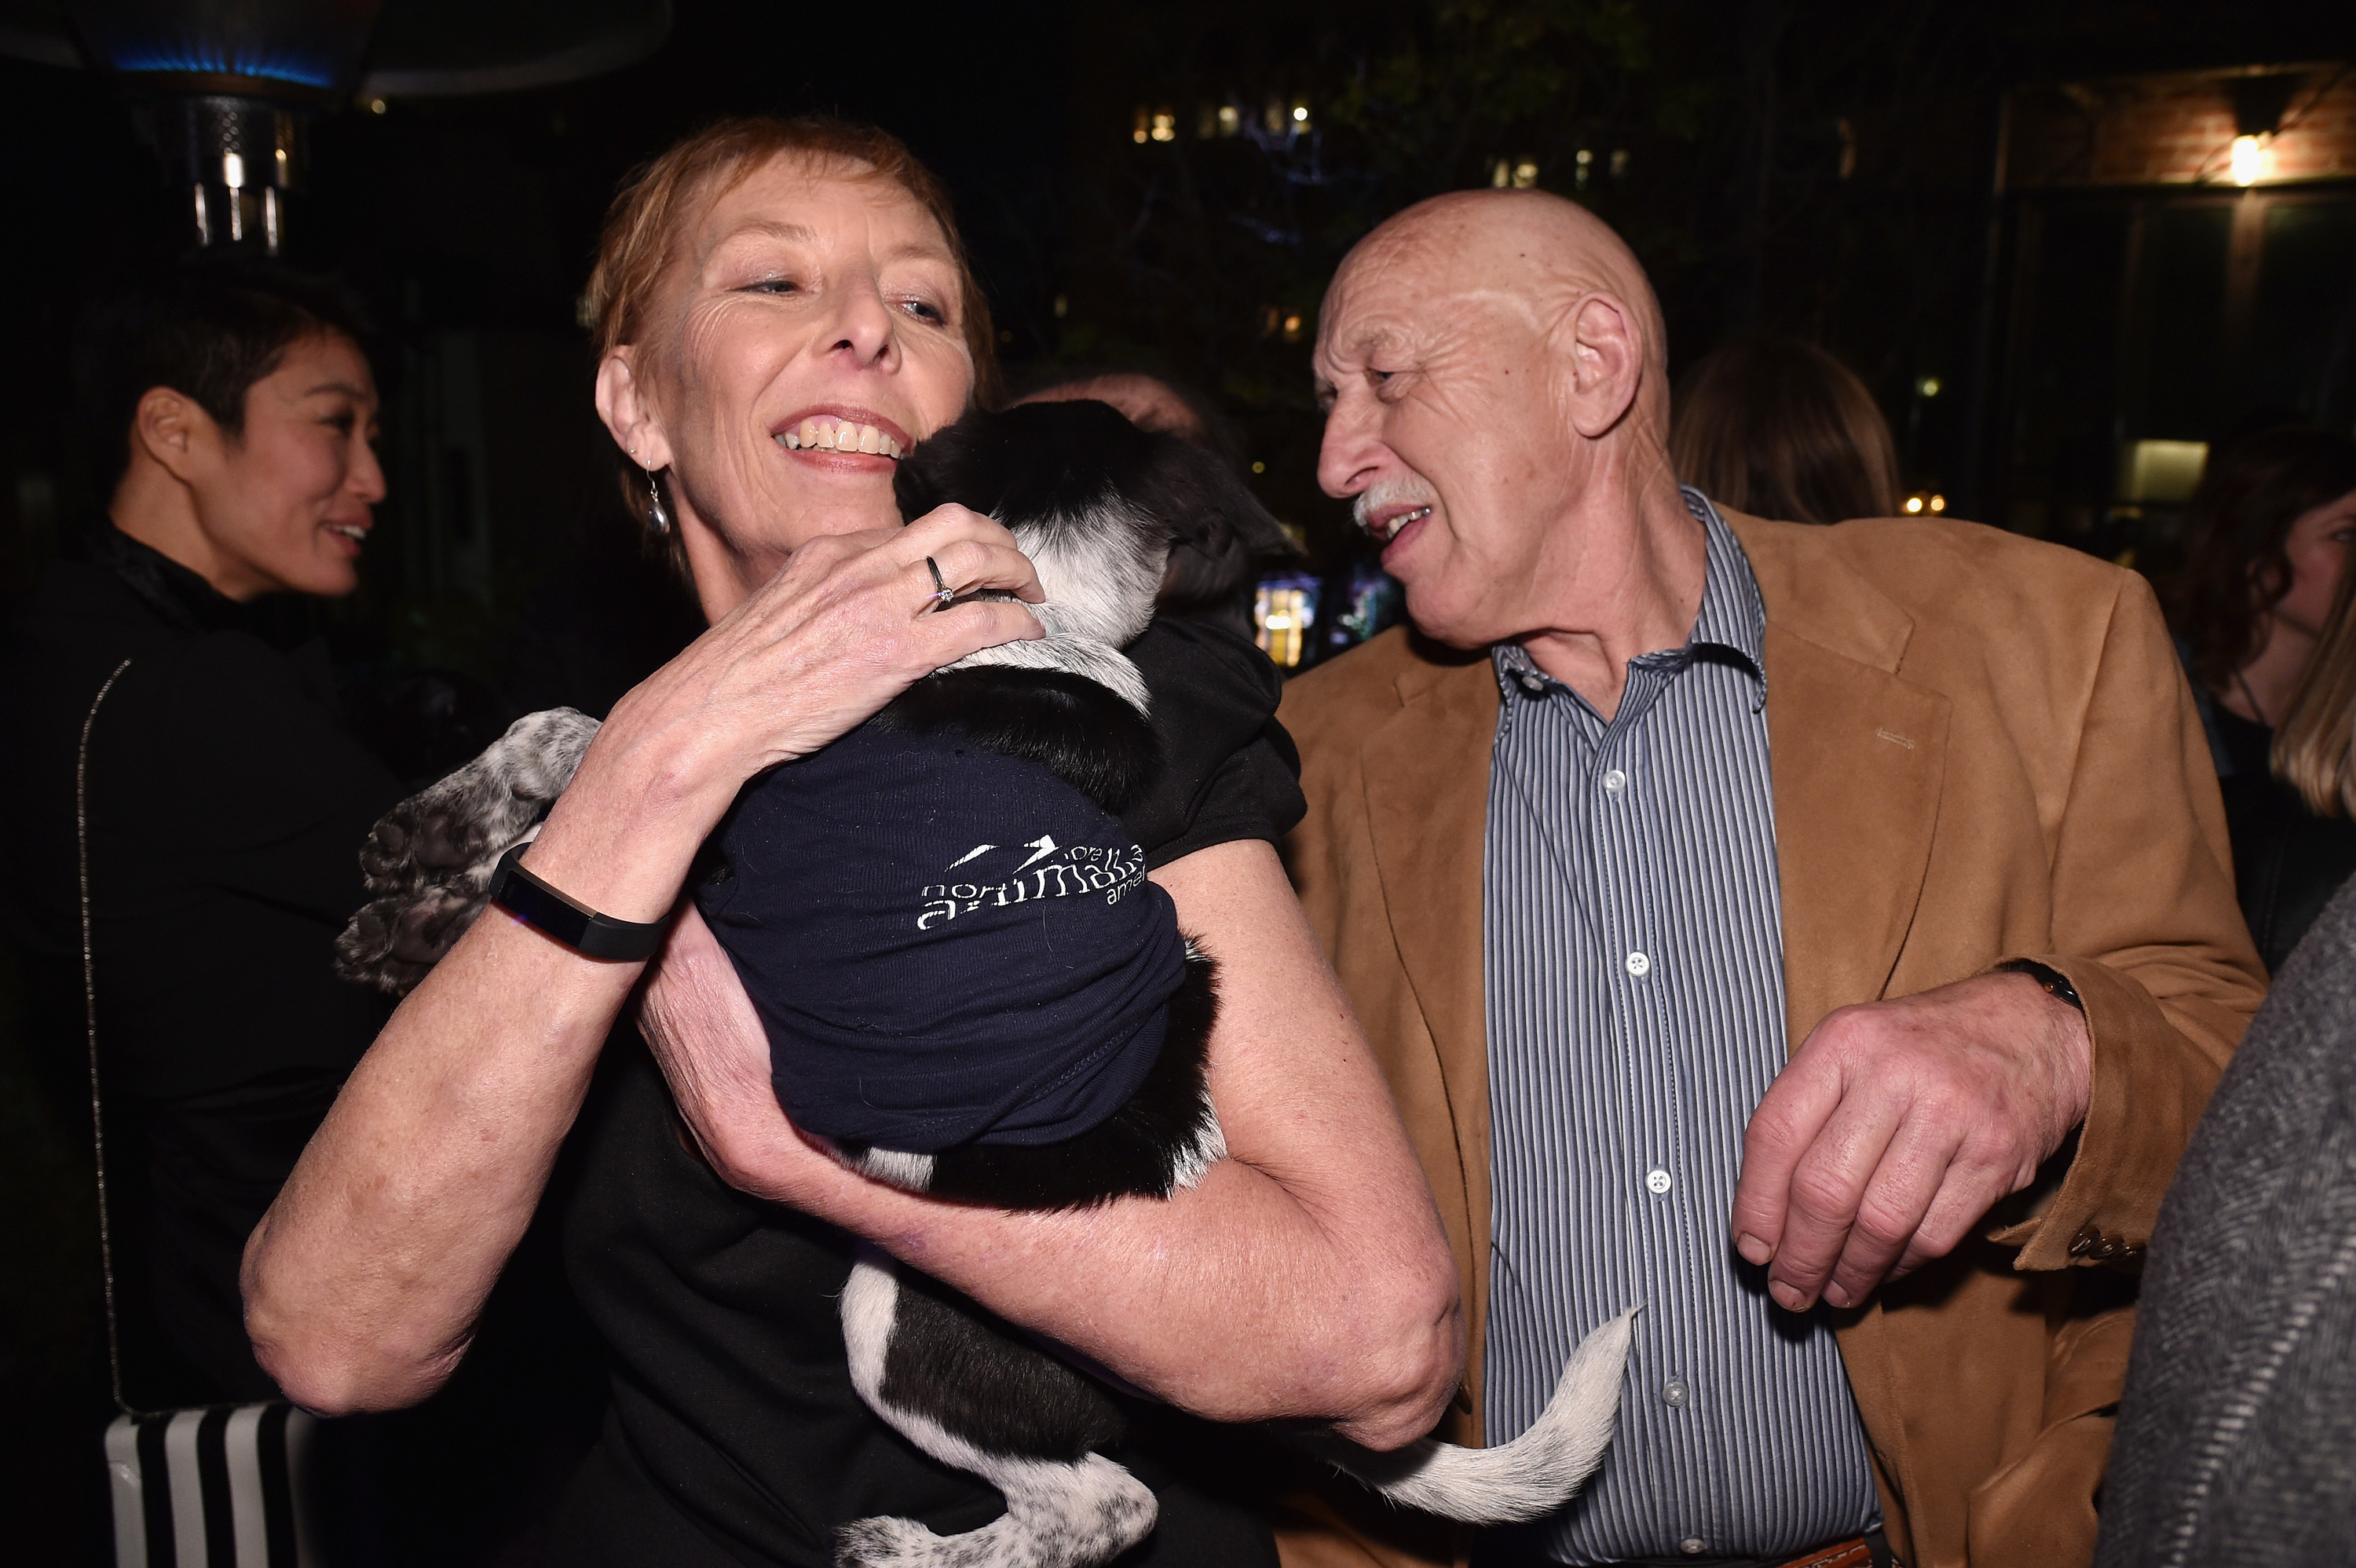 'The Incredible Dr. Pol' stars Diane Pol and her husband, veterinarian Dr. Jan Pol